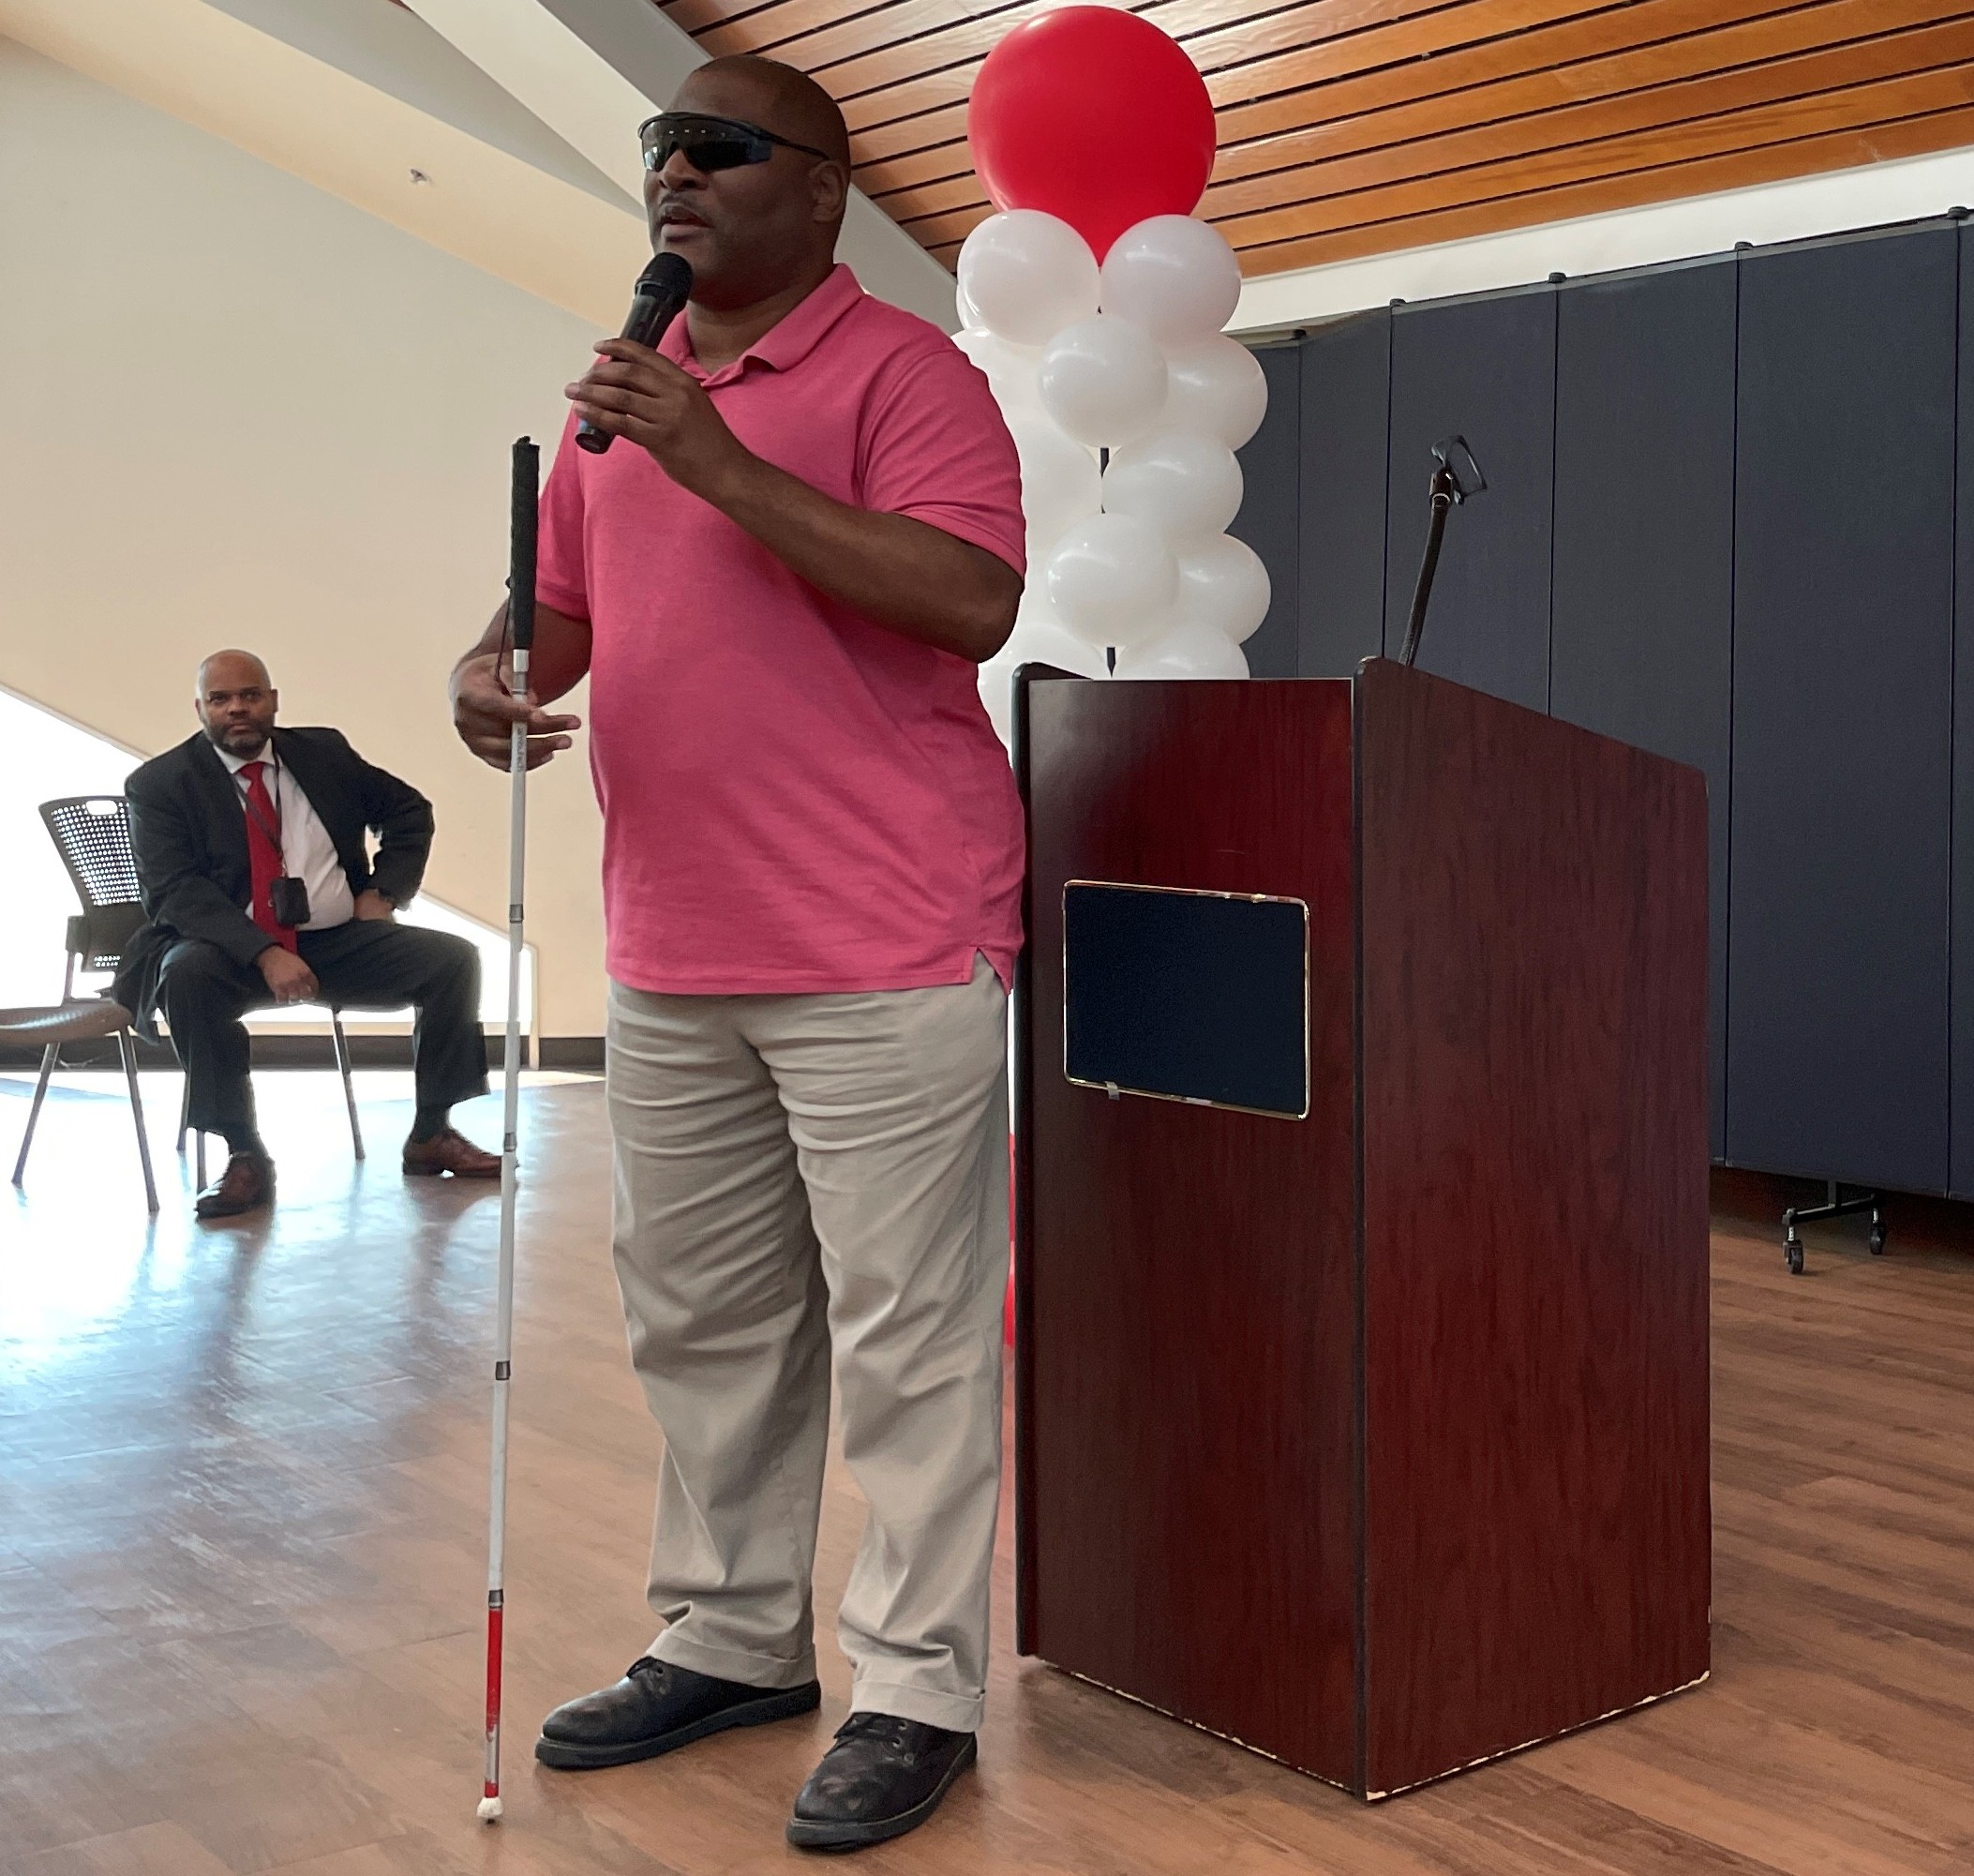 Guest speaker talks to the audience about using a white cane in front of white cane awareness banner and red and white balloons.